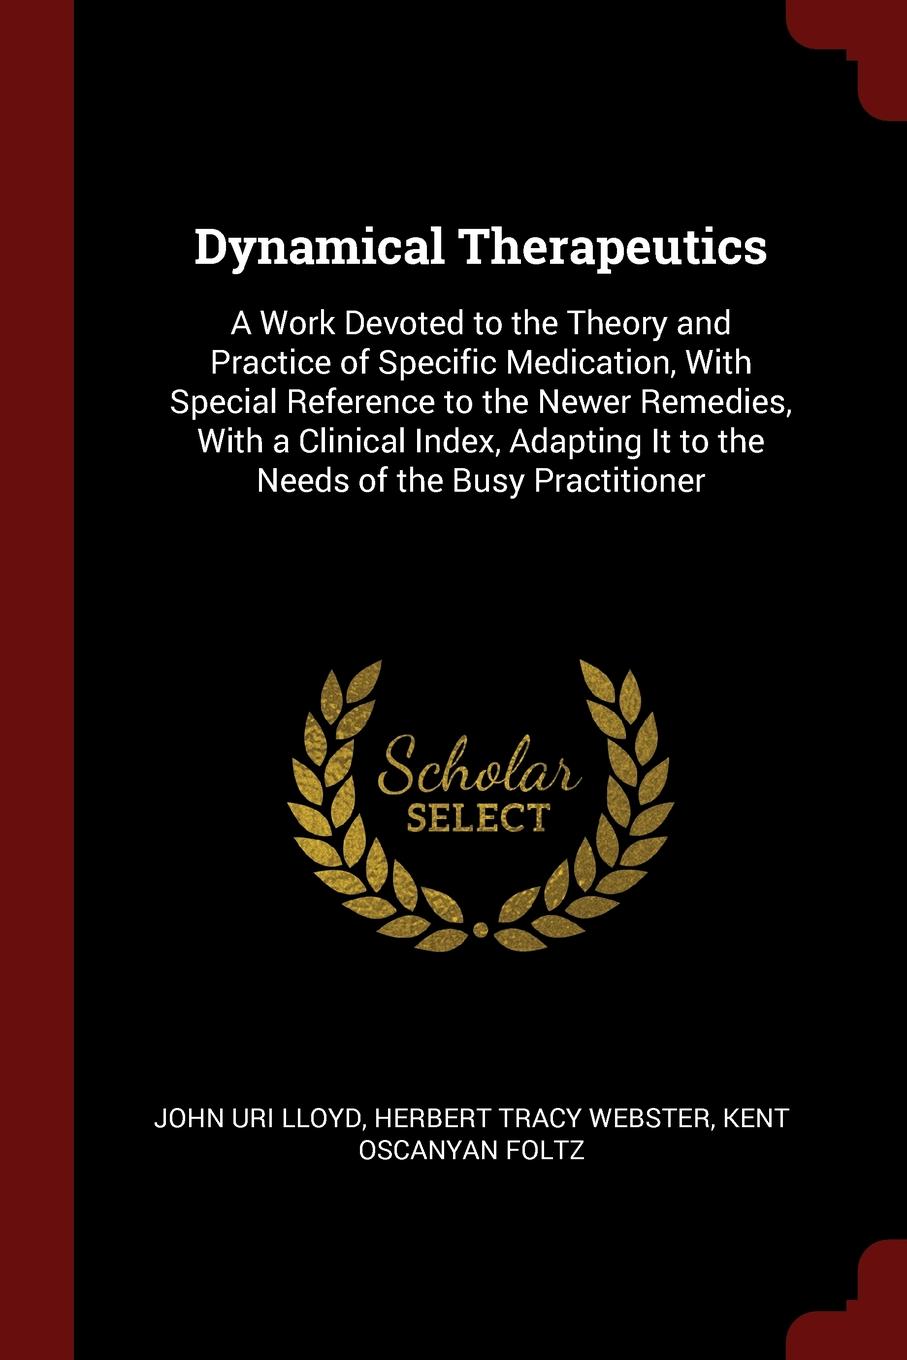 Dynamical Therapeutics. A Work Devoted to the Theory and Practice of Specific Medication, With Special Reference to the Newer Remedies, With a Clinical Index, Adapting It to the Needs of the Busy Practitioner